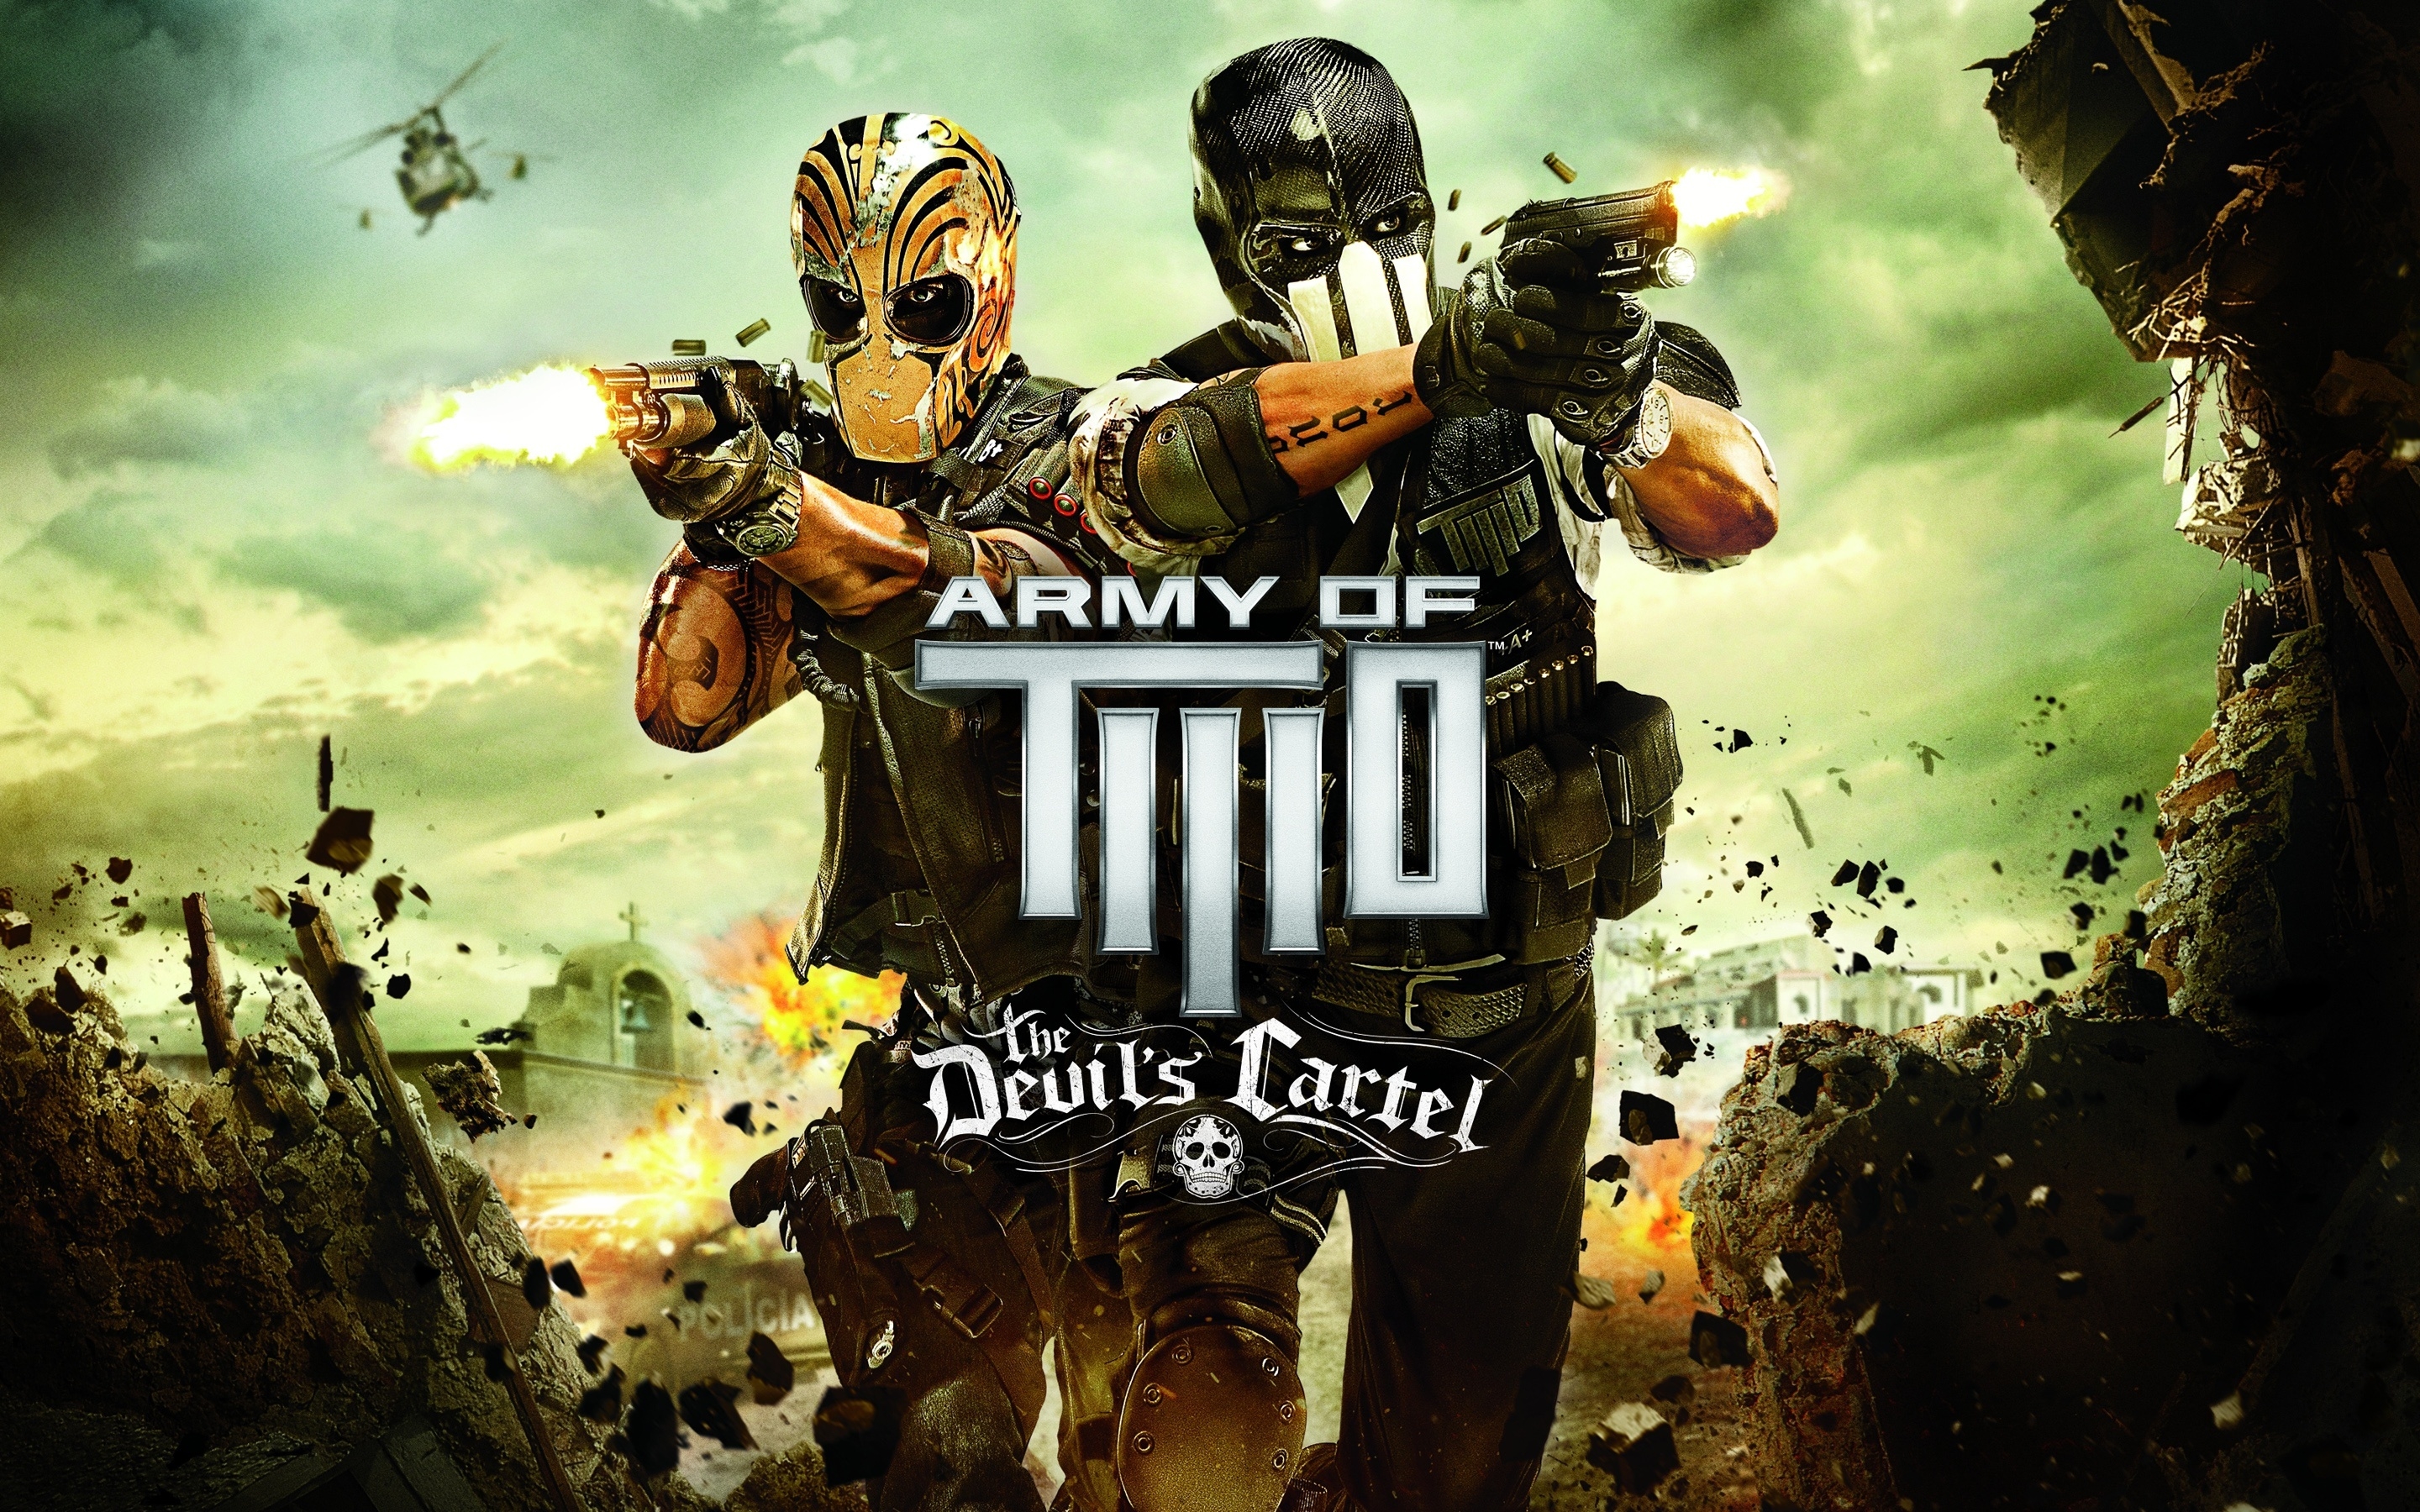 Army of Two The Devils Cartel for 2880 x 1800 Retina Display resolution